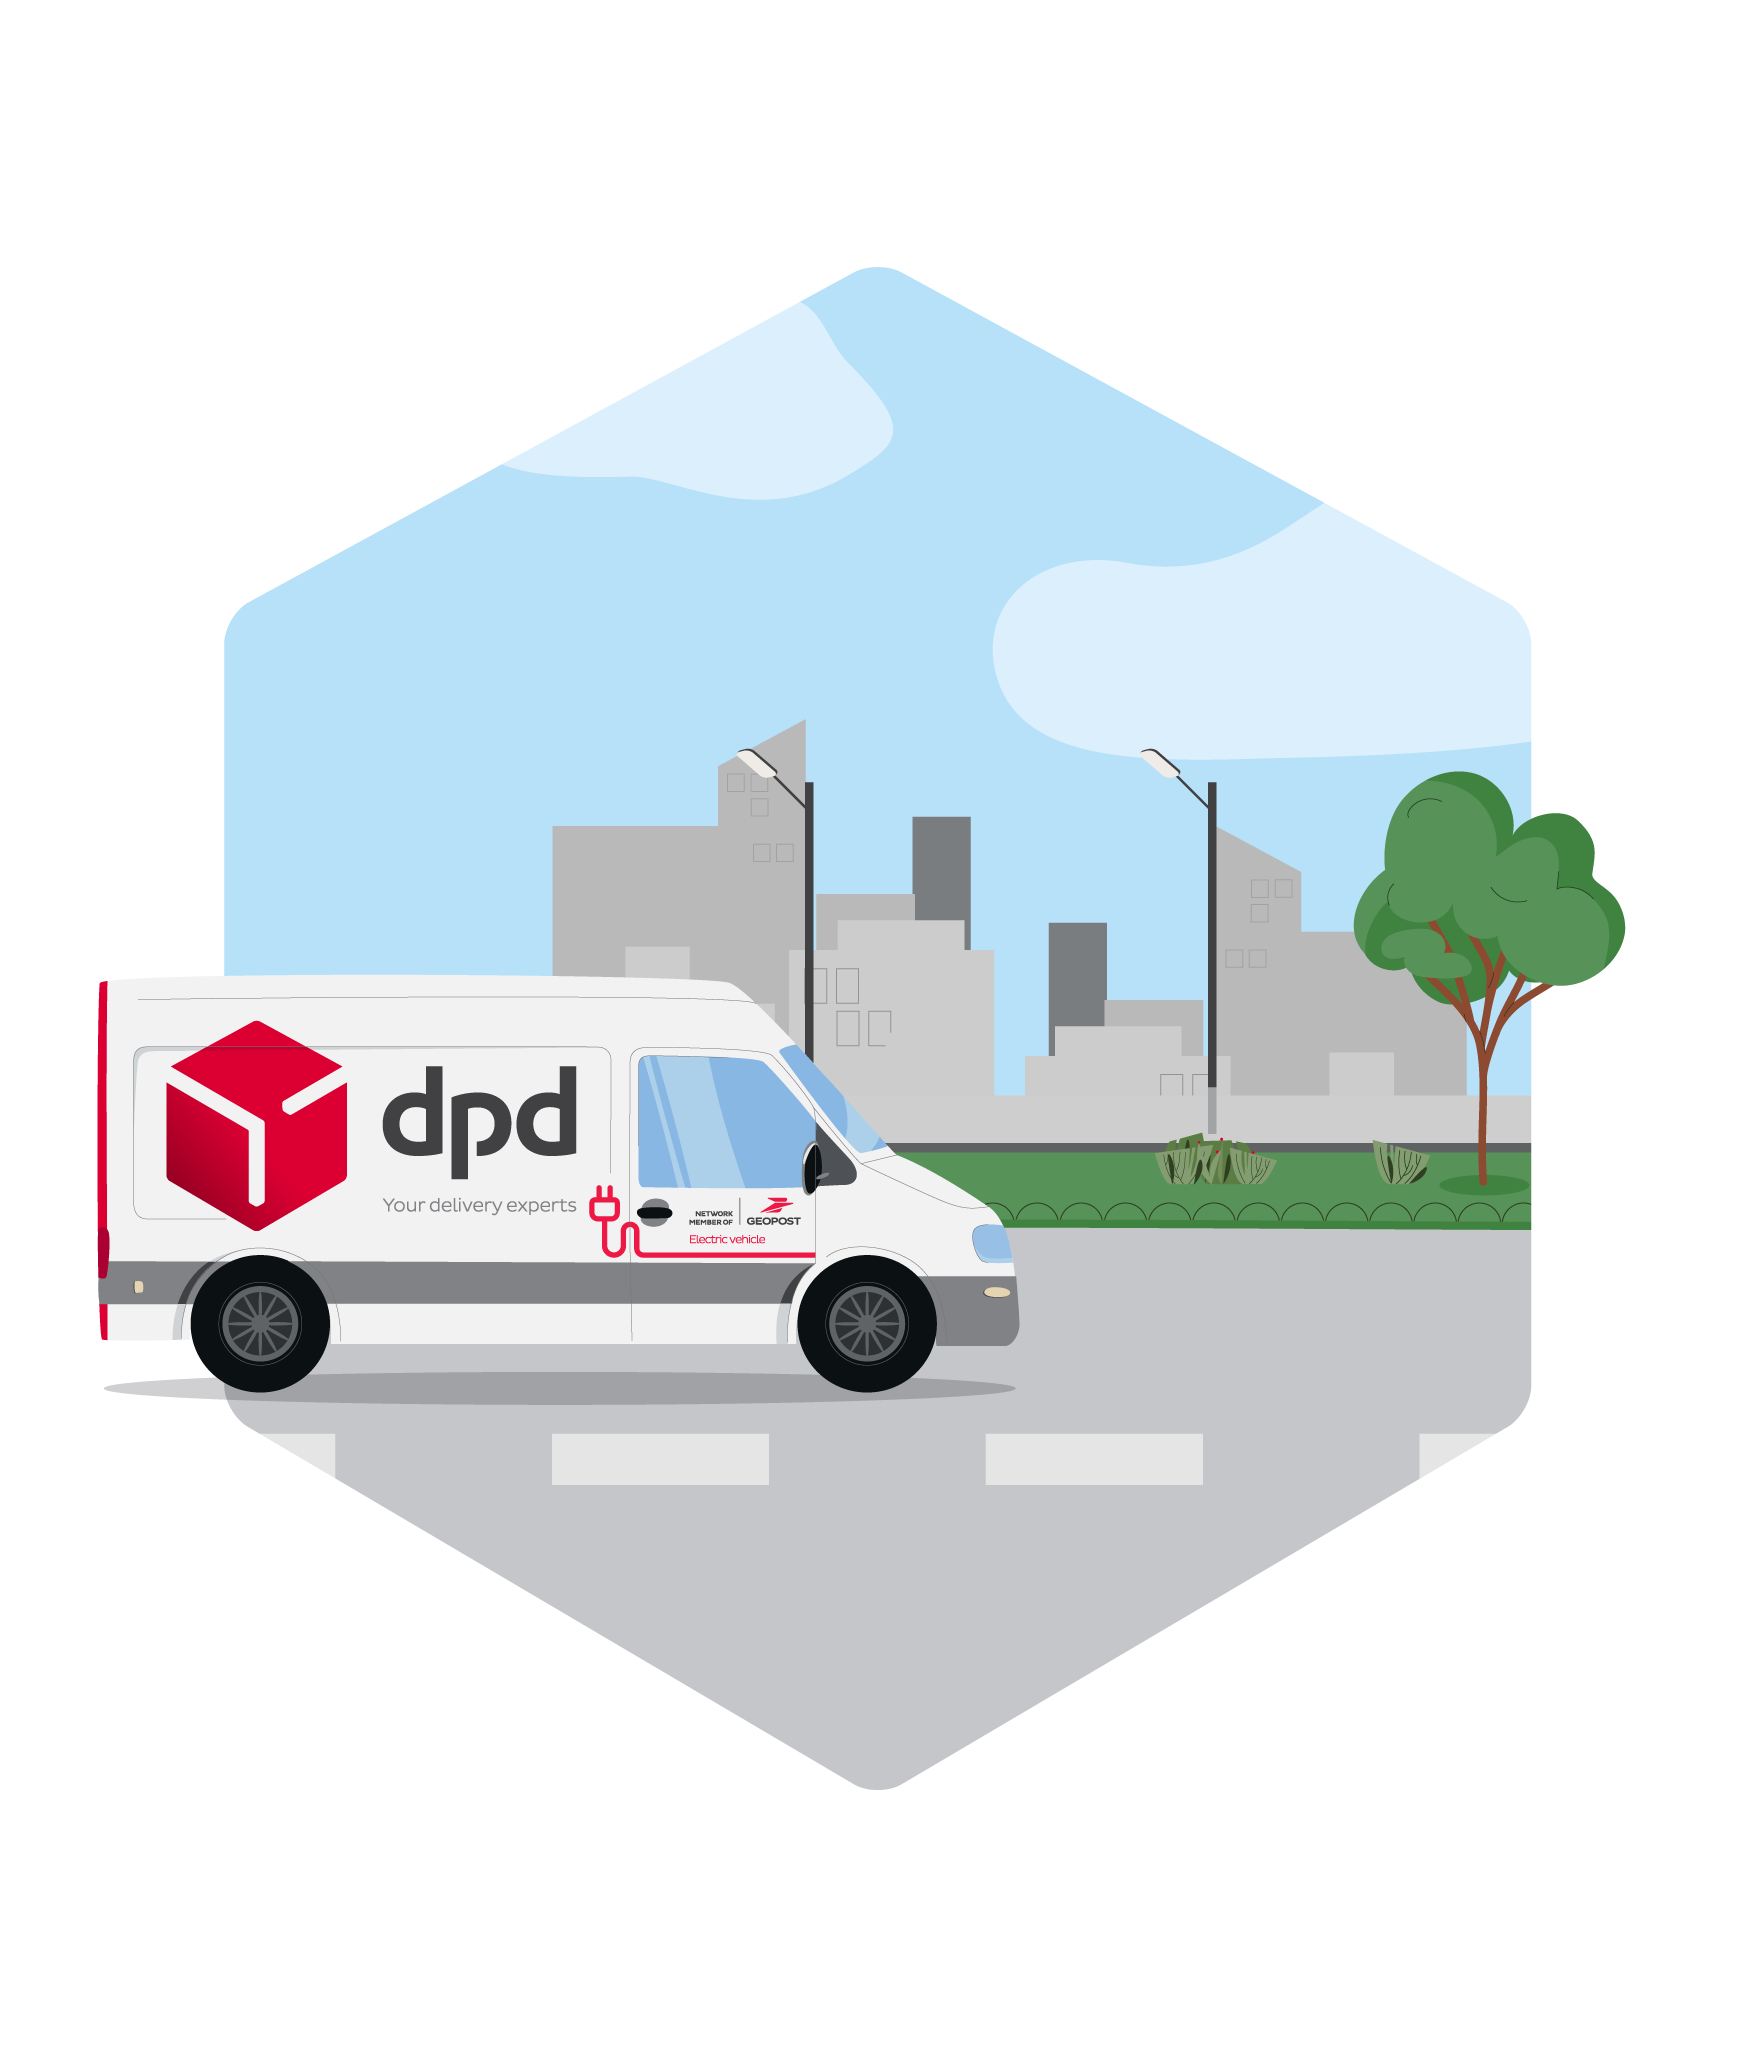 DPD-in-transit-sustainability.png